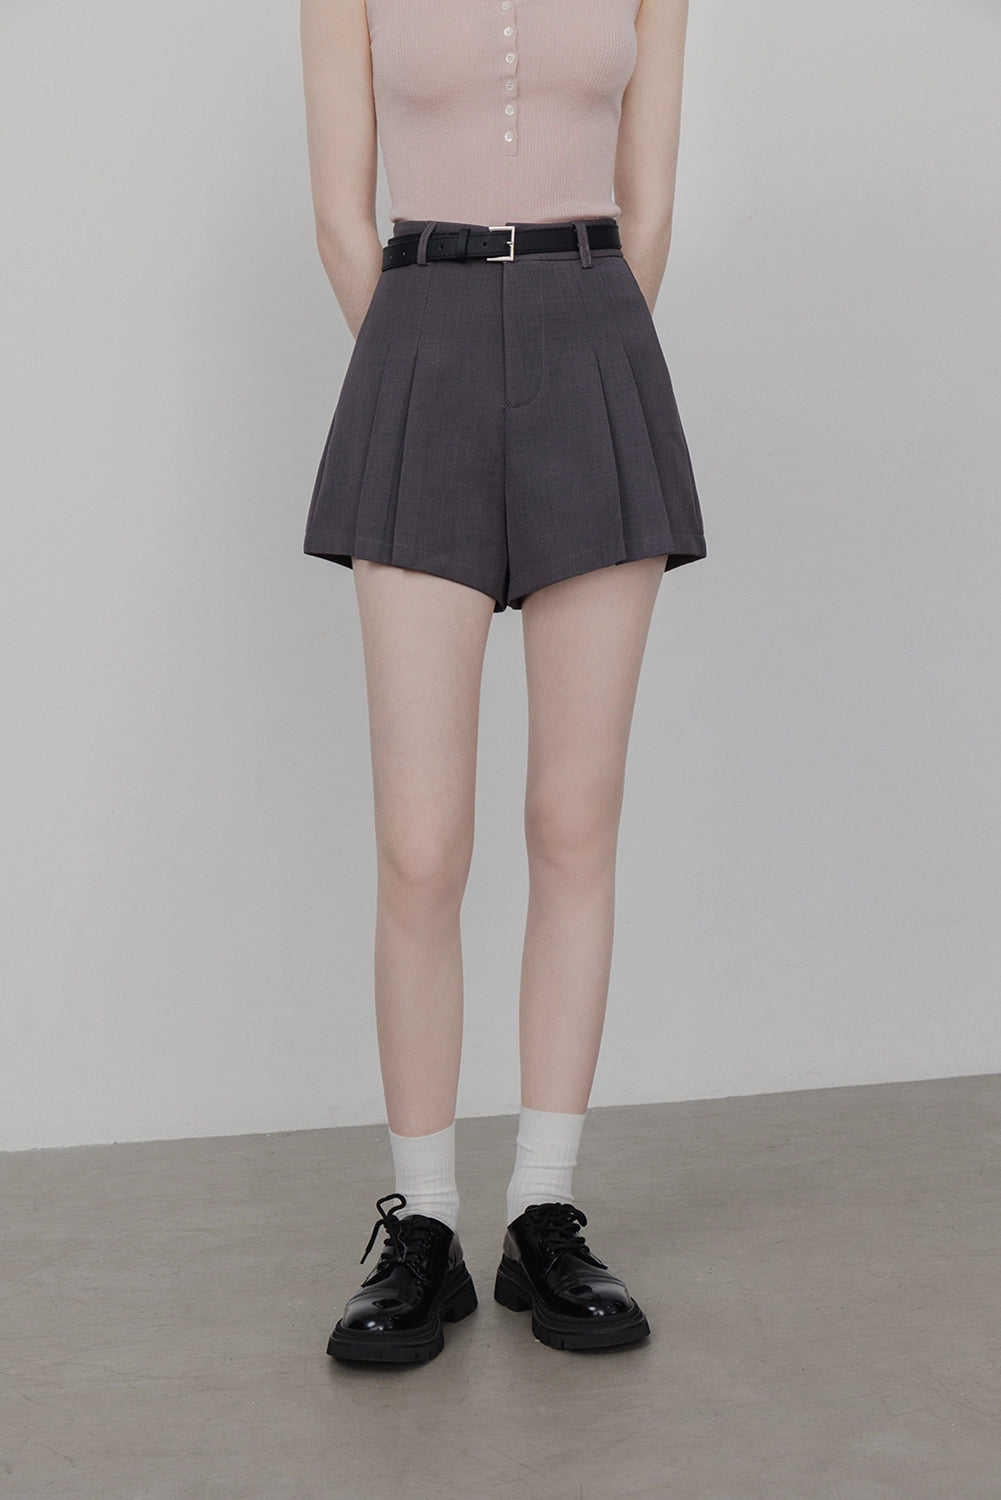 Women's High-Waisted Pleated Shorts with Contrast Belt